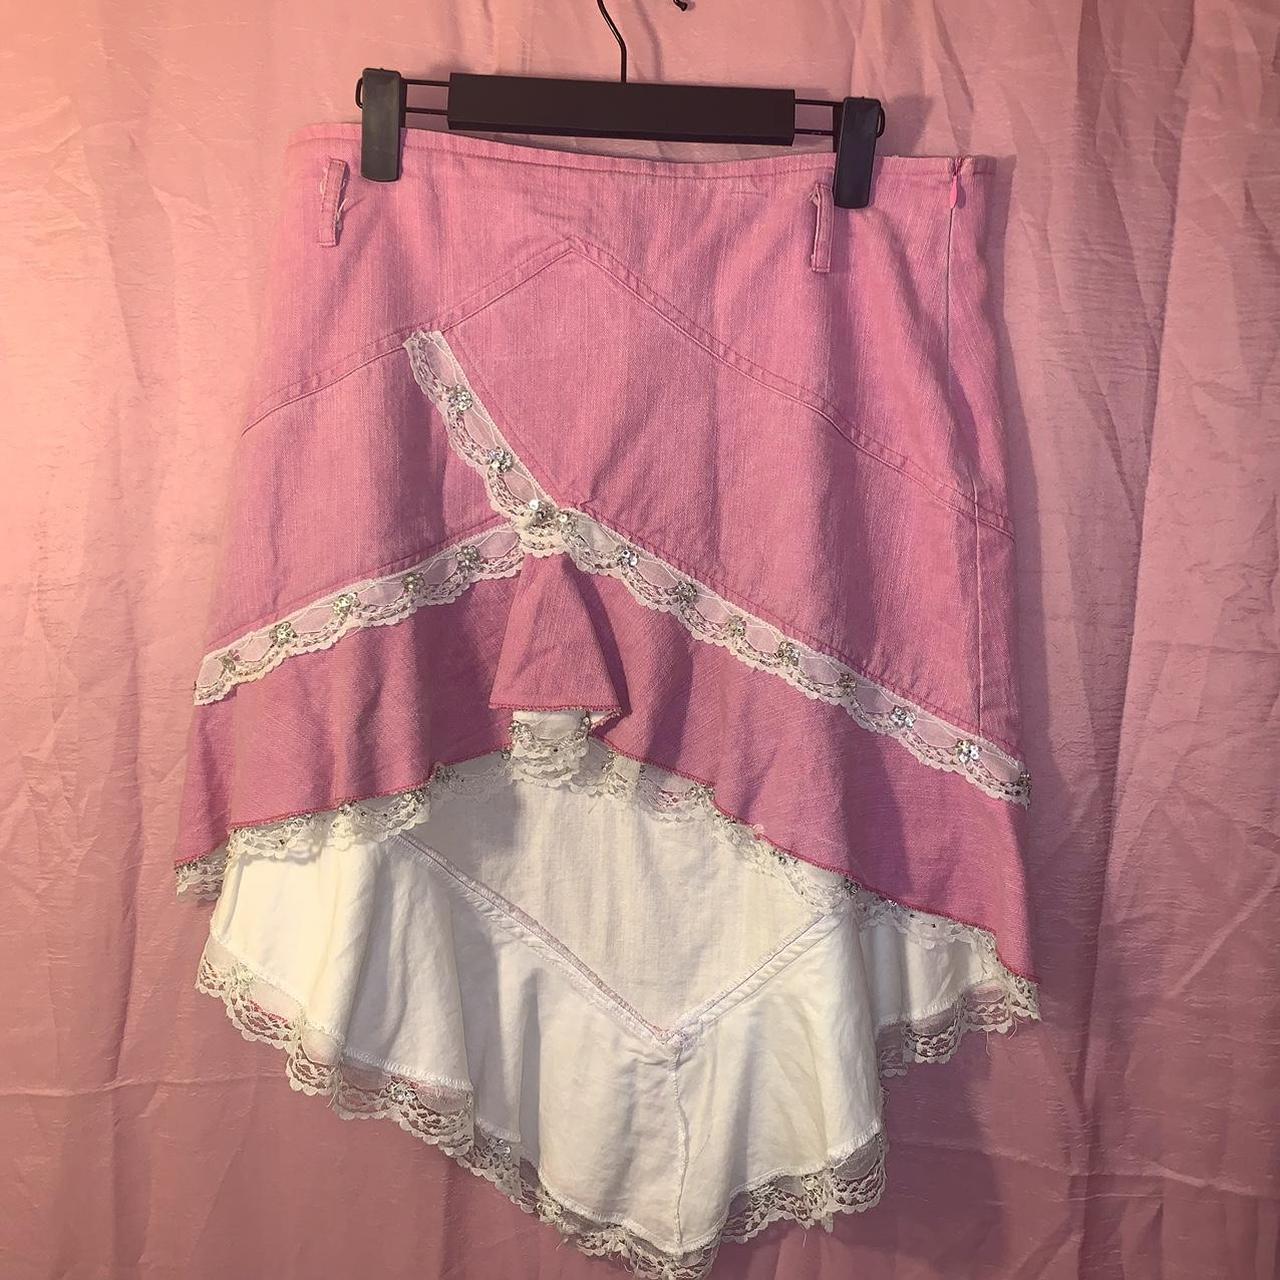 Women’s Pink and White Cotton Skirt